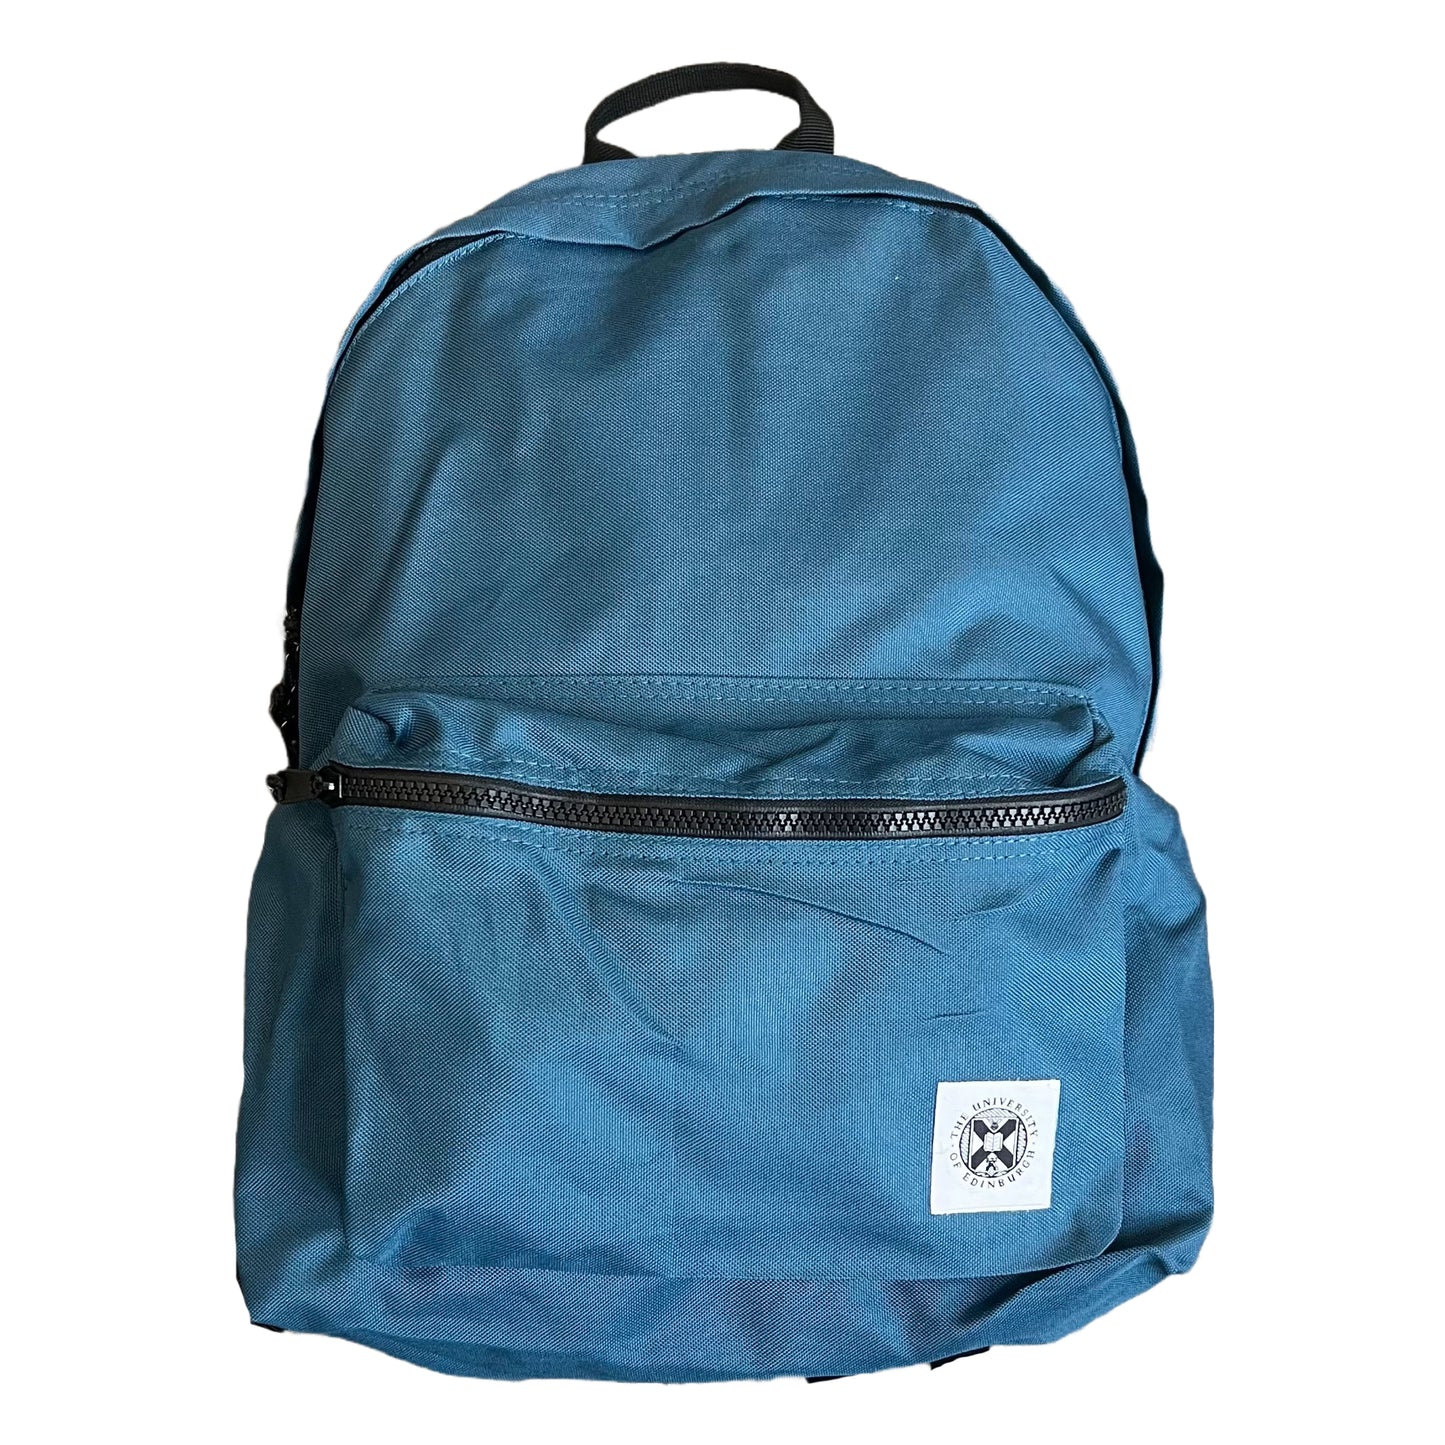 Blue backpack with a front pouch. It has the University of Edinburgh's crest stitched onto the front pocket.